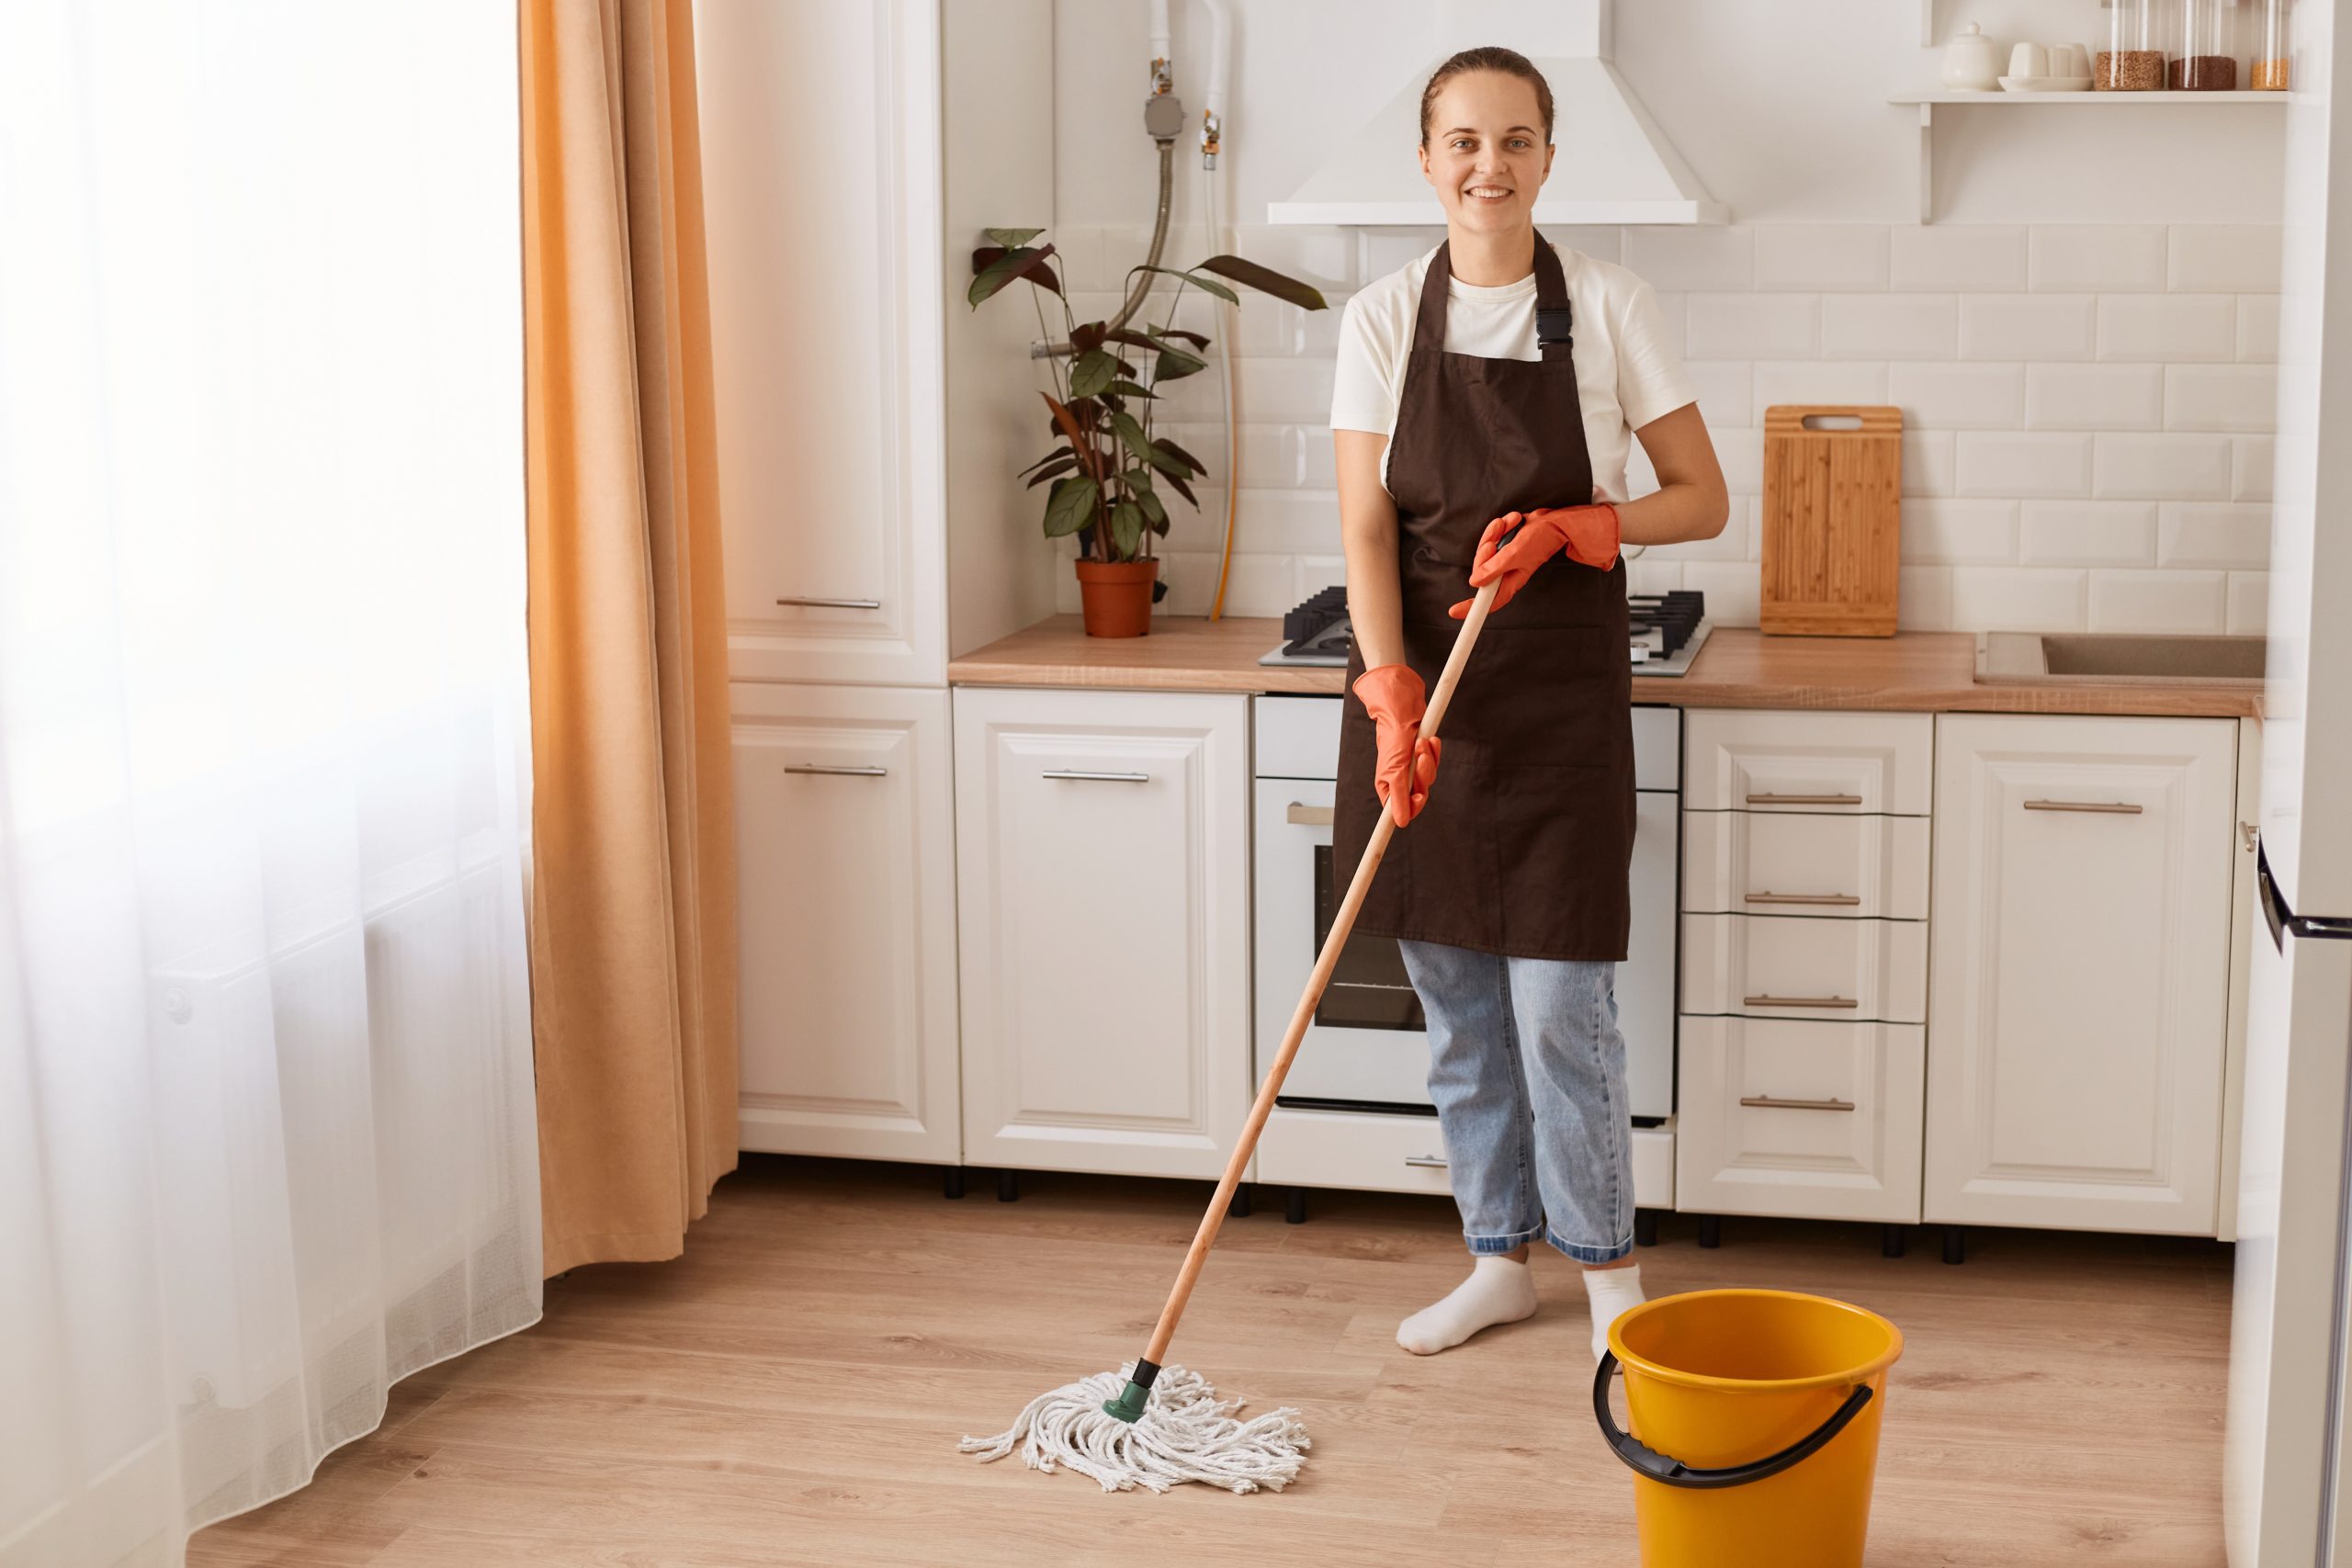 Full length portrait of attractive cheerful hardworking woman making fast domestic work, washing floor in modern light white interior kitchen, wearing brown apron, looking at camera.